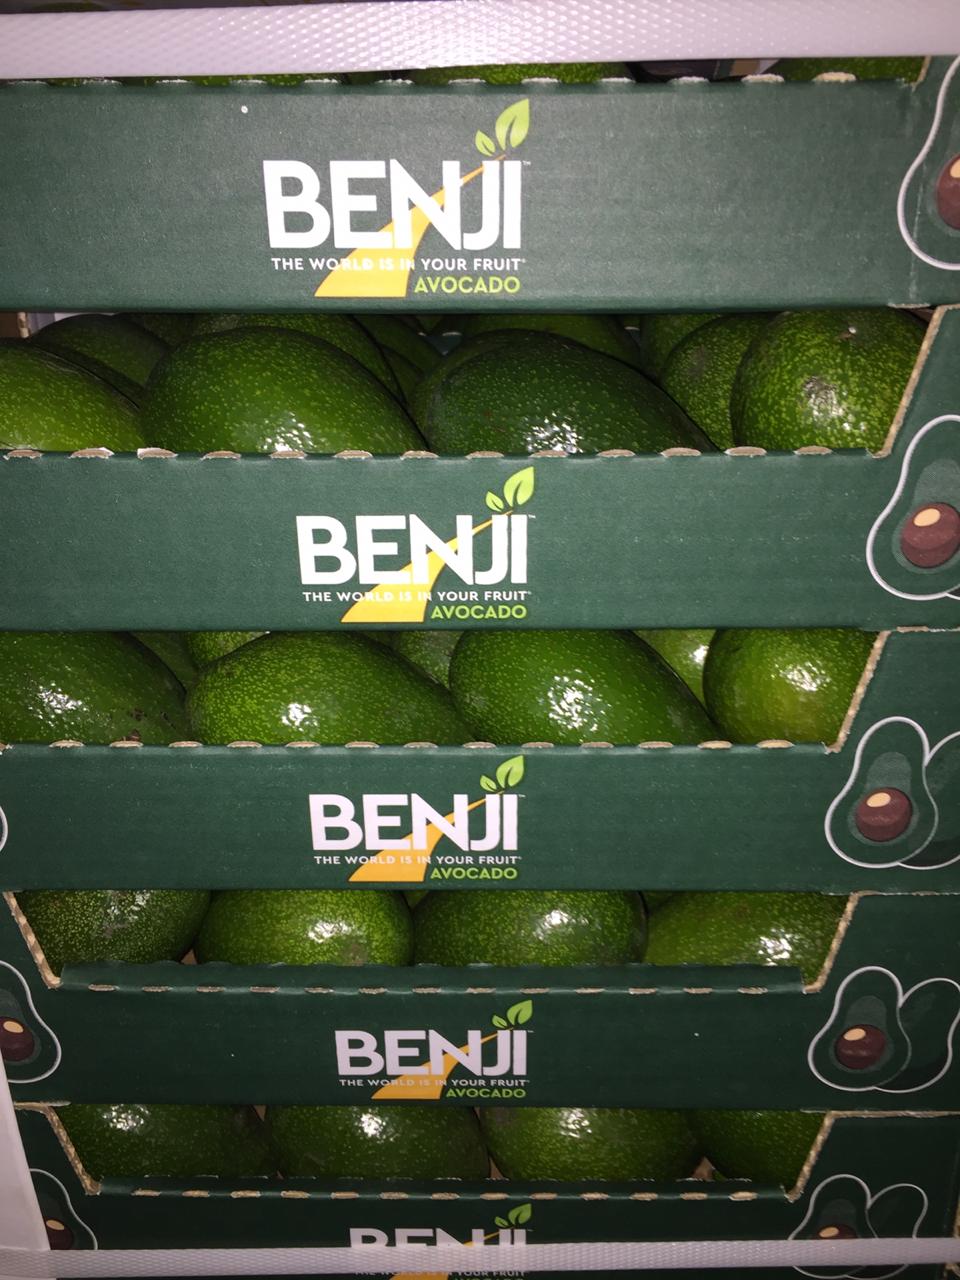 Package of avocados packed in Morocco of the Benji brand - Beva Fruits International (BFI)